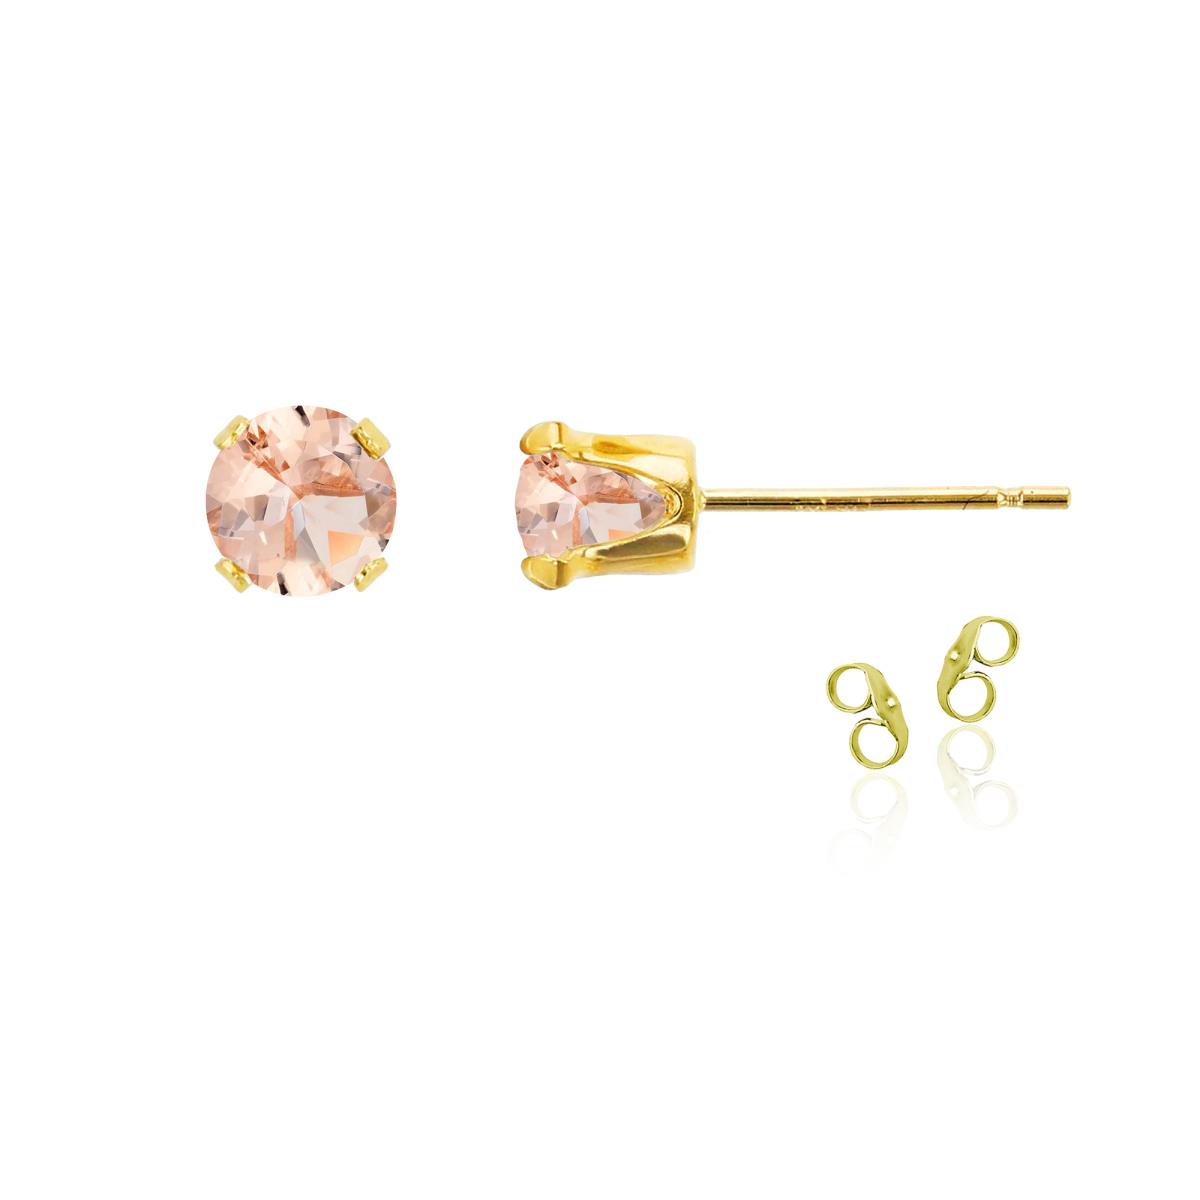 Sterling Silver Yellow 5mm Round Morganite Stud Earring with Clutch